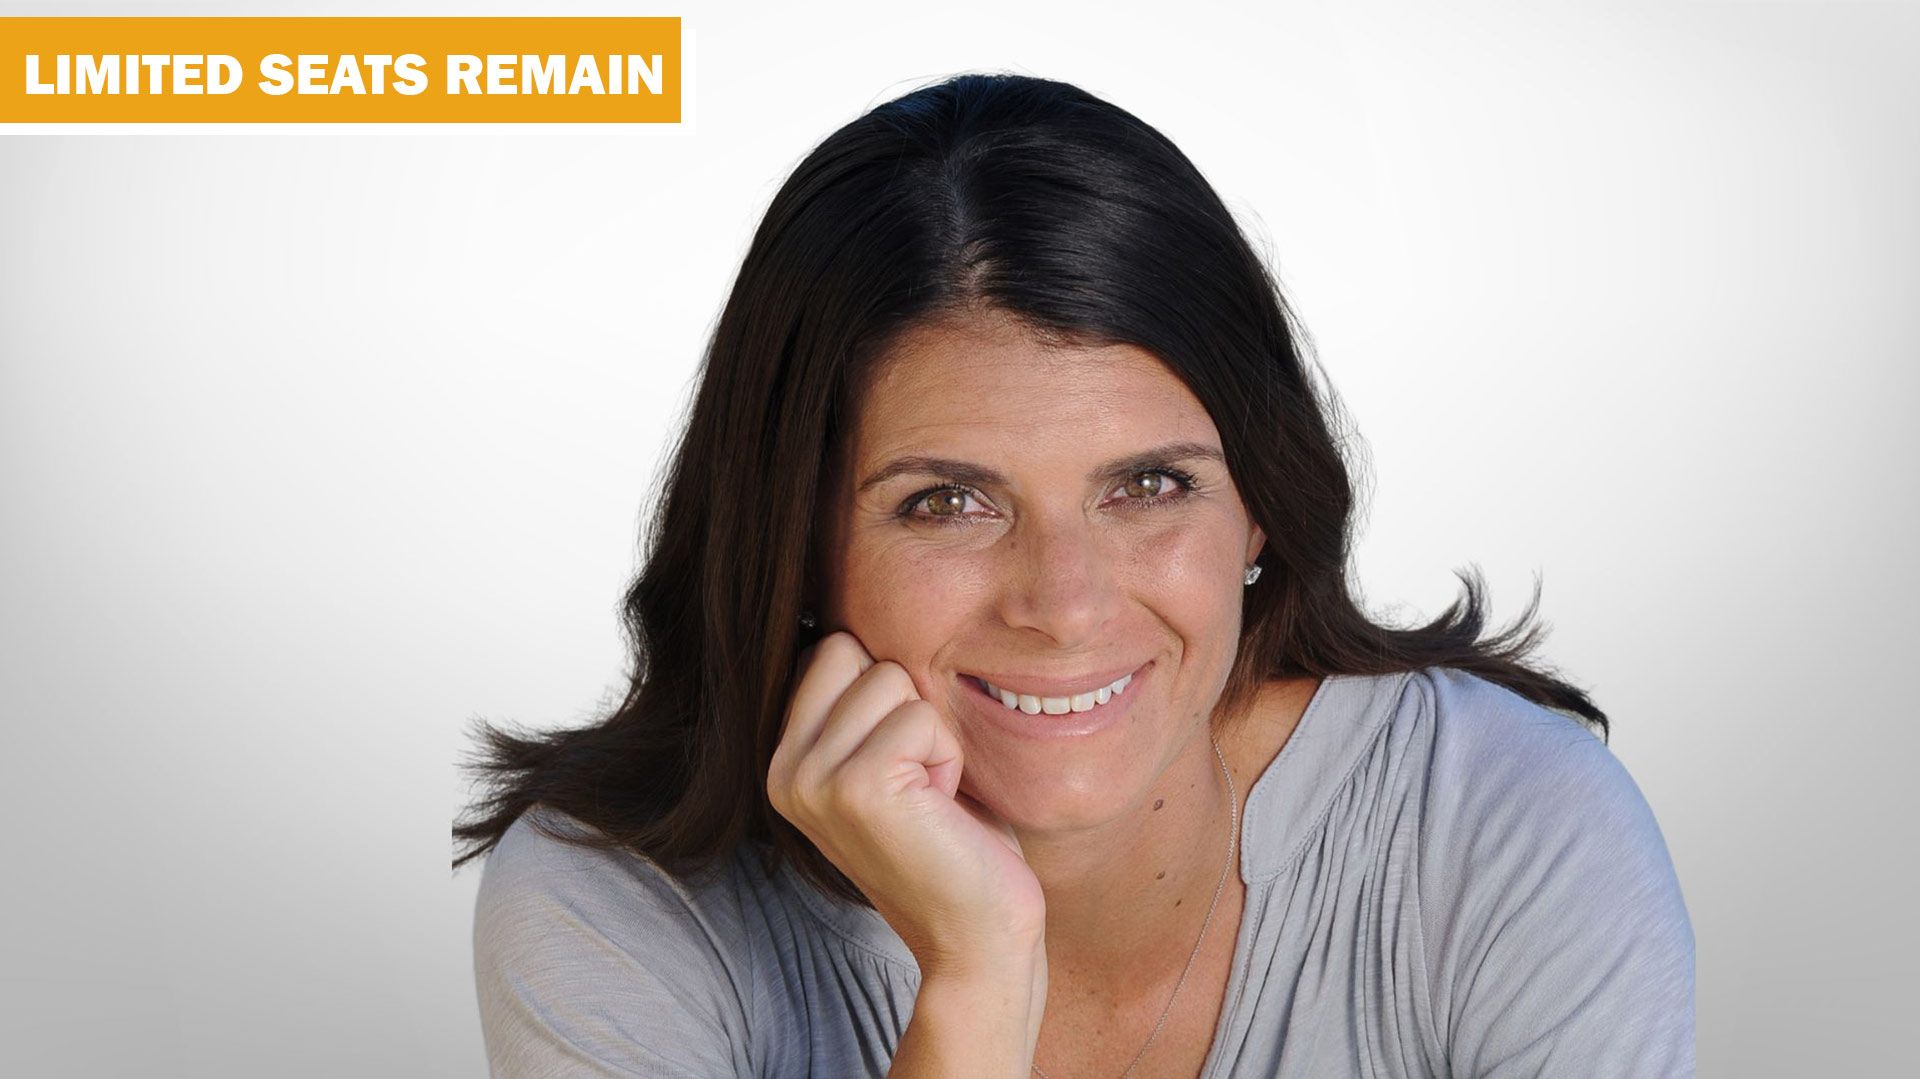 A Conversation with Mia Hamm - Seating is Limited